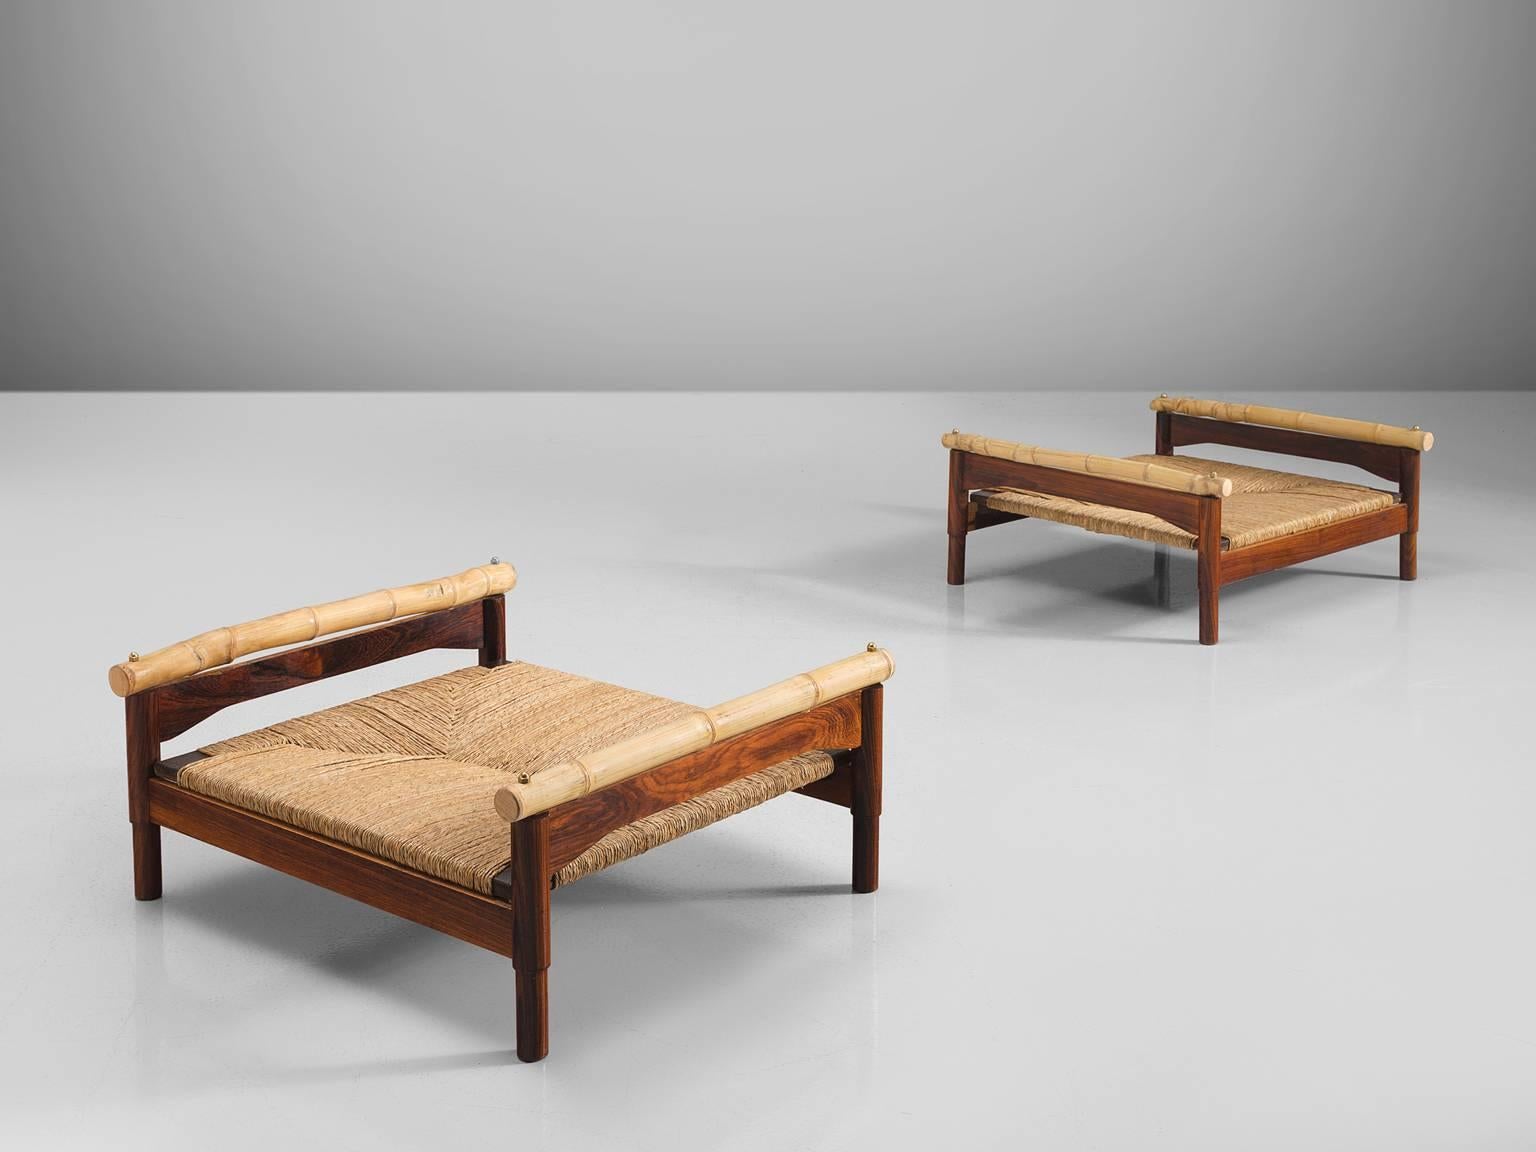 Benches or stools, rosewood, cane, bamboo, Italy, 1960s.

These midcentury stools are made of rosewood, cane and bamboo are very sculptural and robust. Their design is as such that it is very low to the ground. The materials are warm and natural and